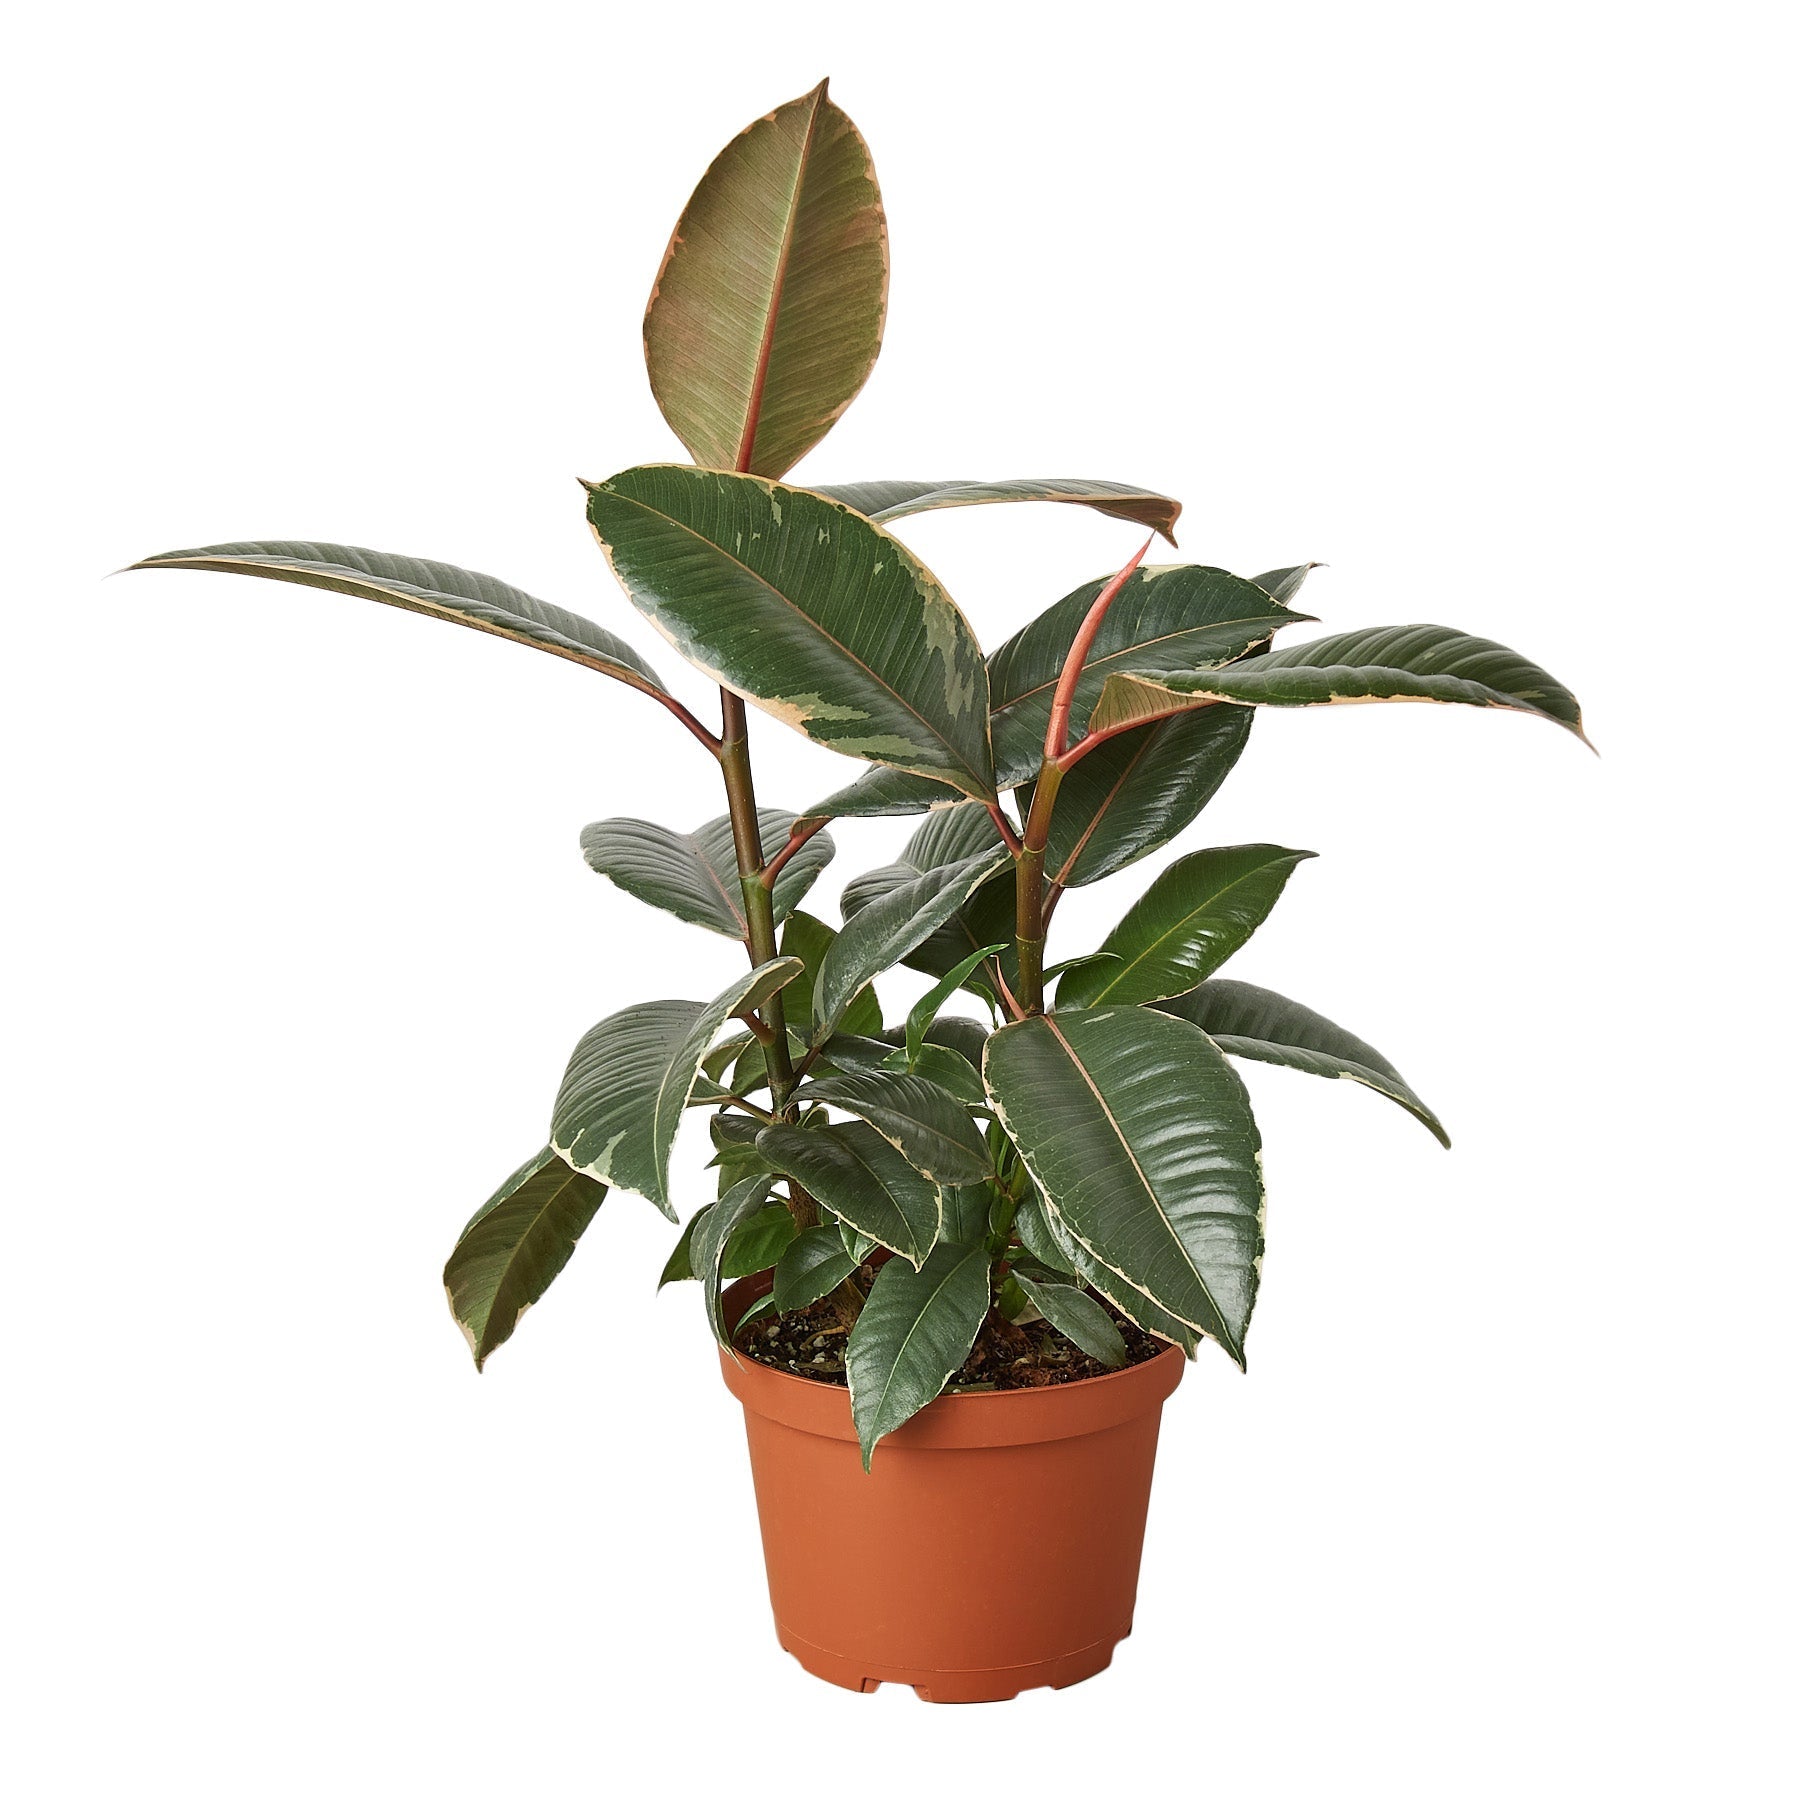 A plant in a pot on a white background, available at one of the top plant nurseries near me.